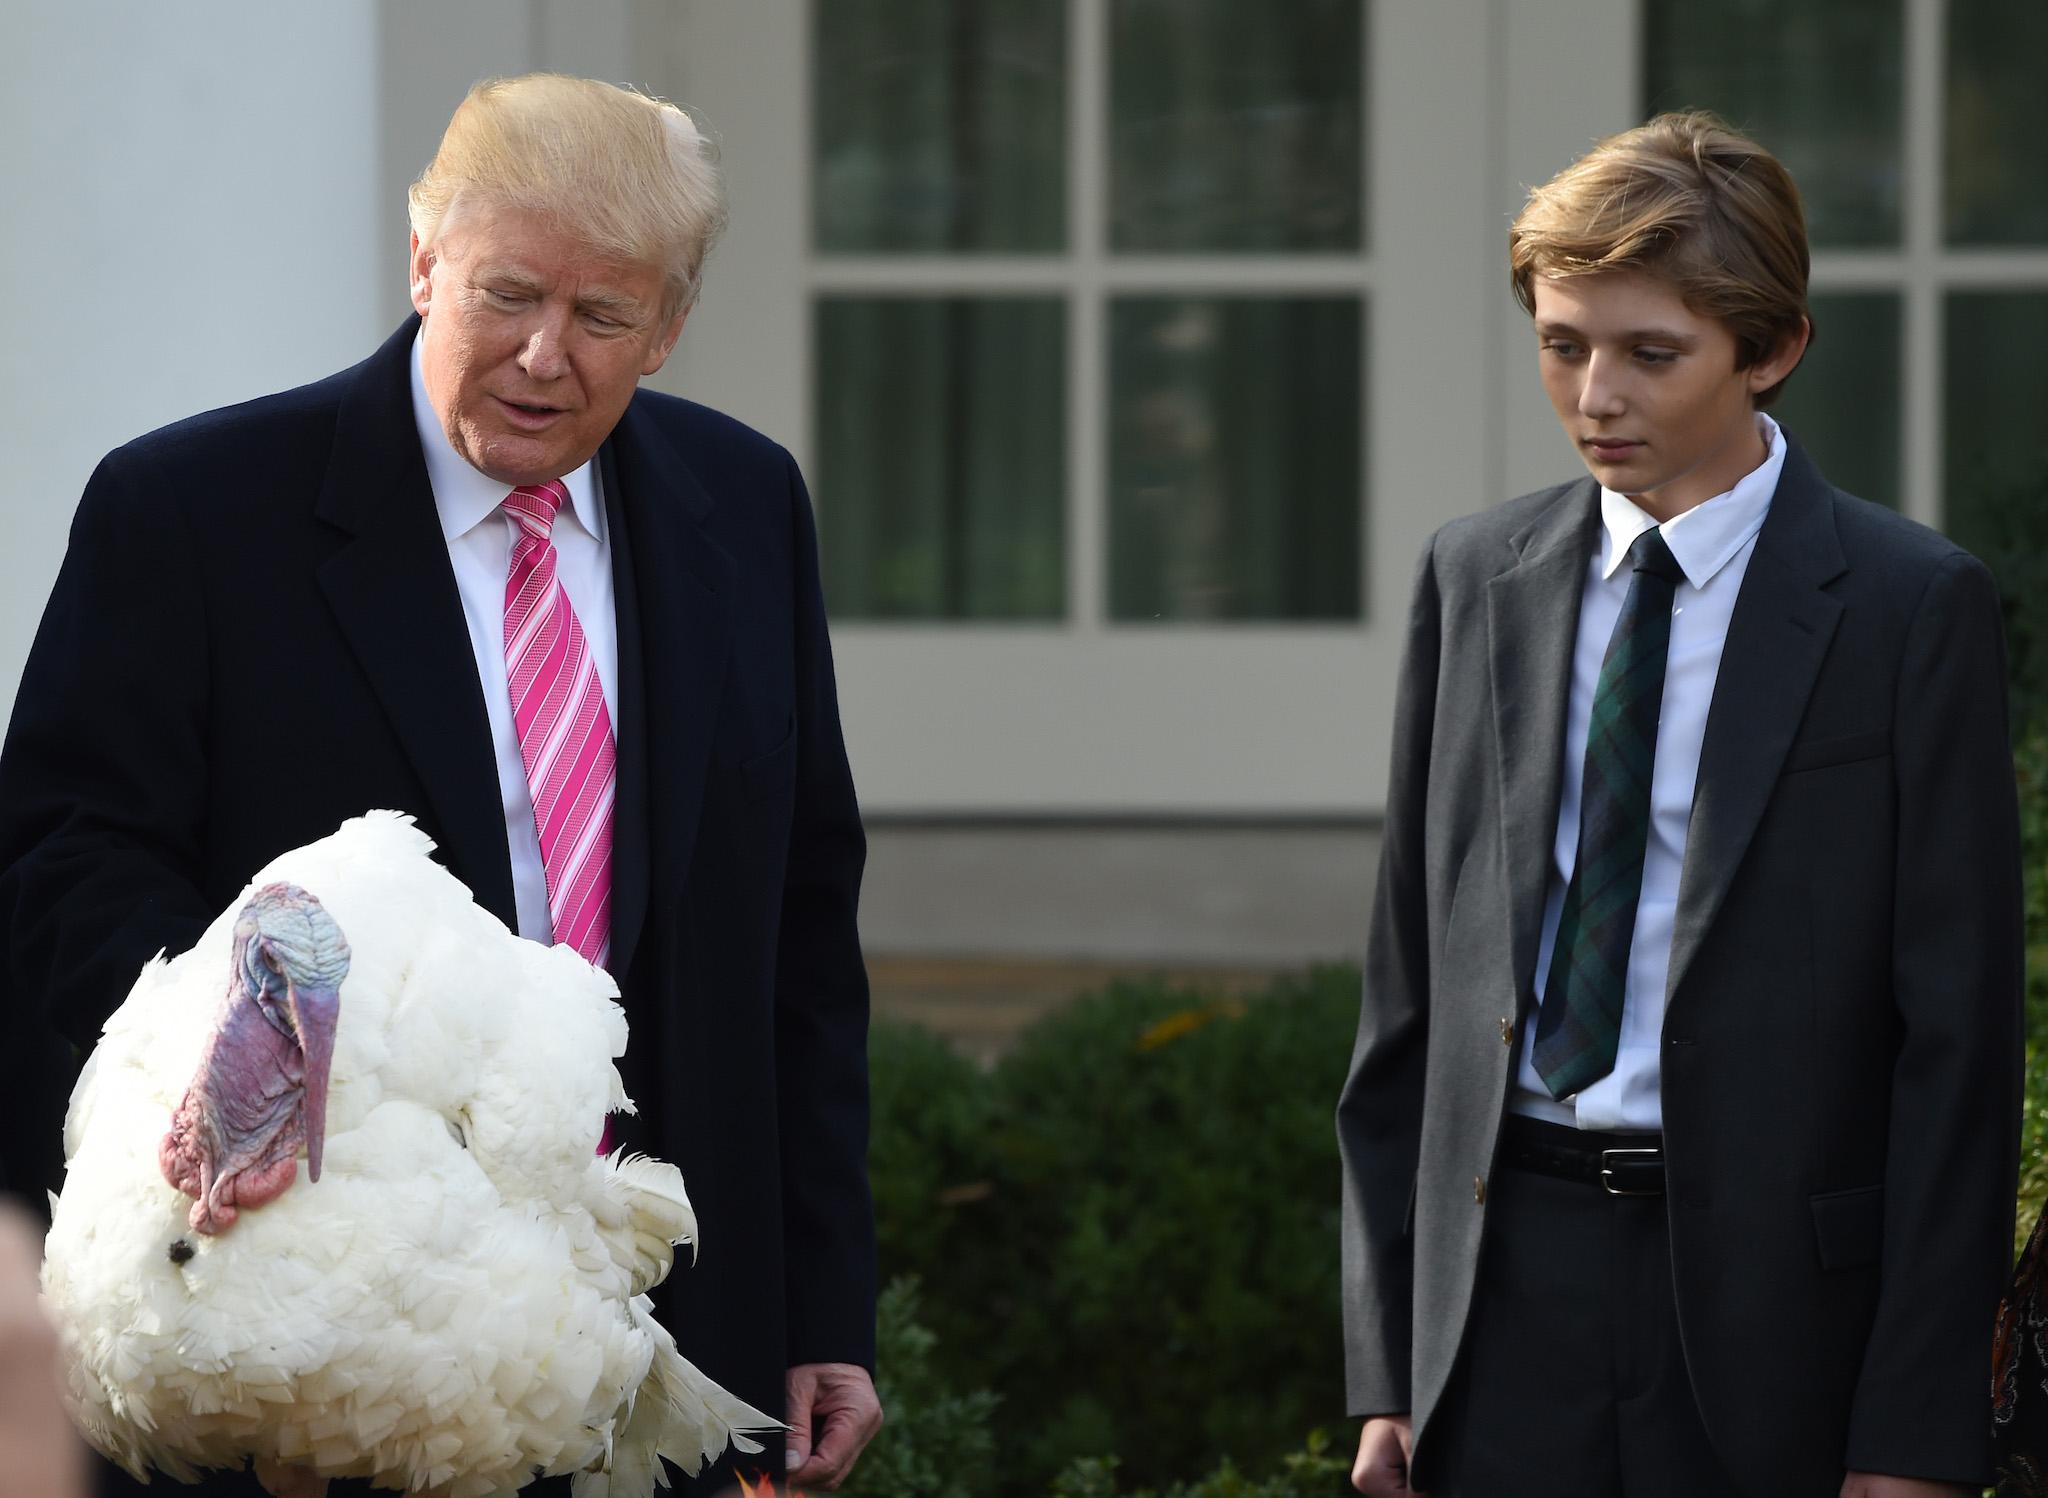 President Donald Trump pardons the turkey, Drumstick, as his son Barron looks on during the turkey pardoning ceremony at the White House last November